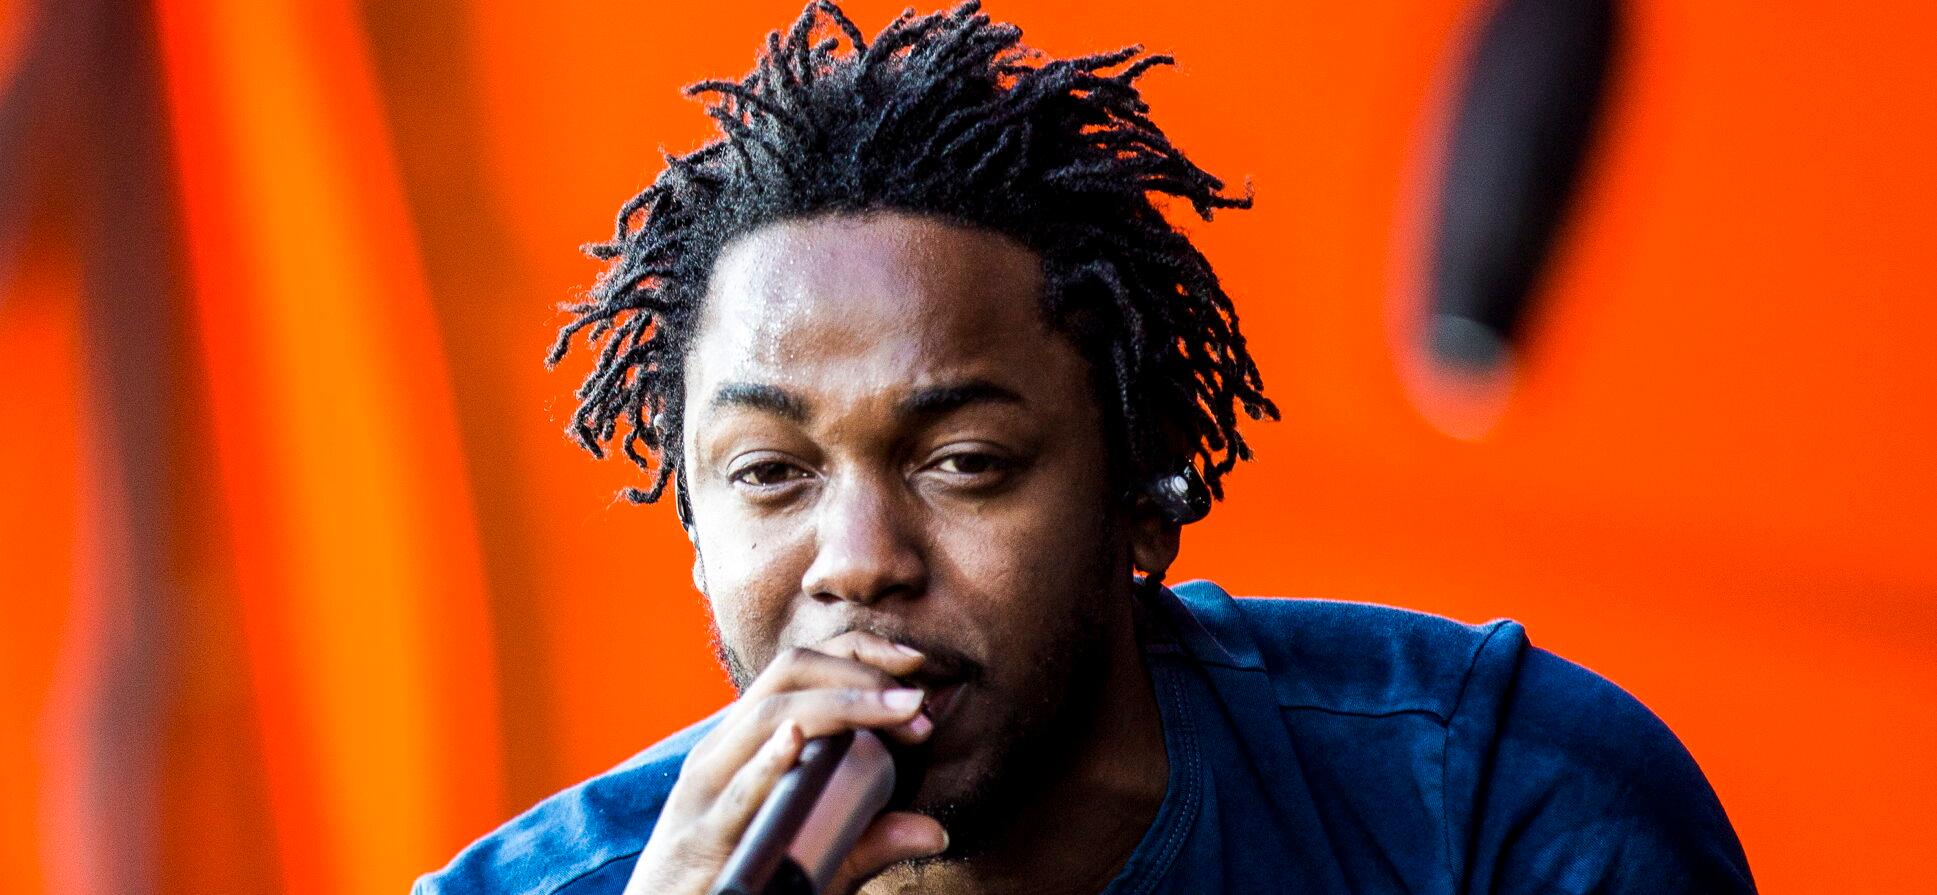 Kendrick Lamar, the American rapper and lyricist, performs a live concert at Orange Stage at the Danish music festival Roskilde Festival 2015.